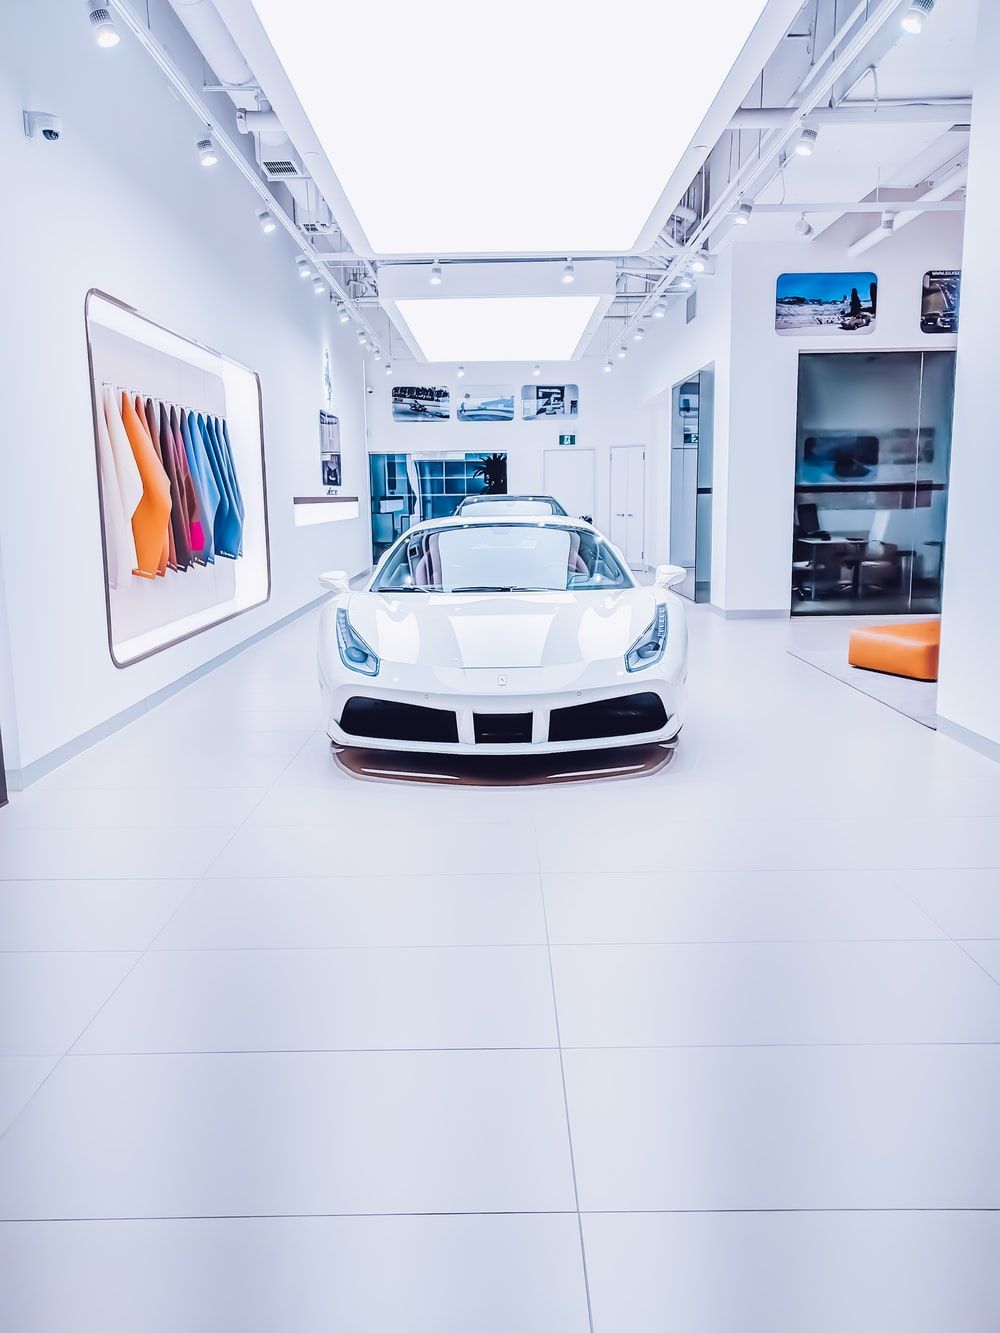 Car Showroom Picture. Download Free Image